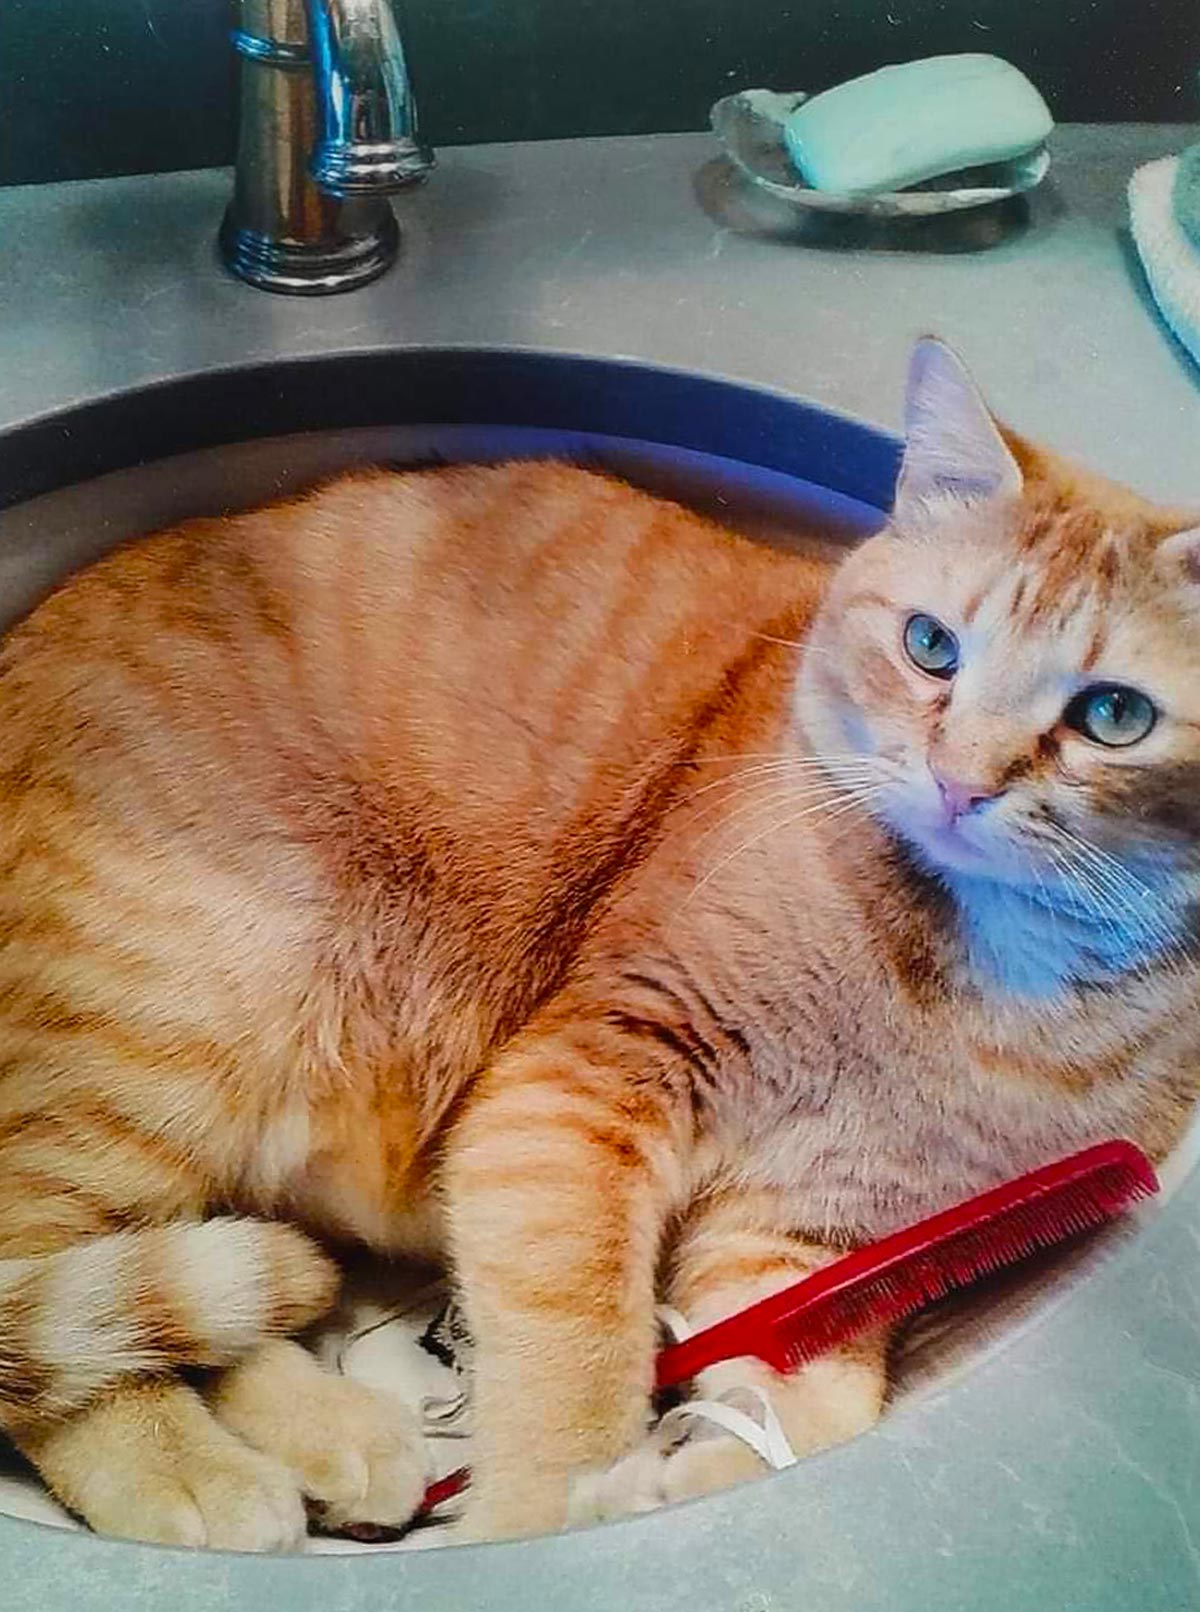 Meet Lucky. Frances R. in Mt. Angel, OR took in Lucky as a kitten, as says he is a great mouser. He’s also quite at home in her bathroom sink, as his picture indicates!